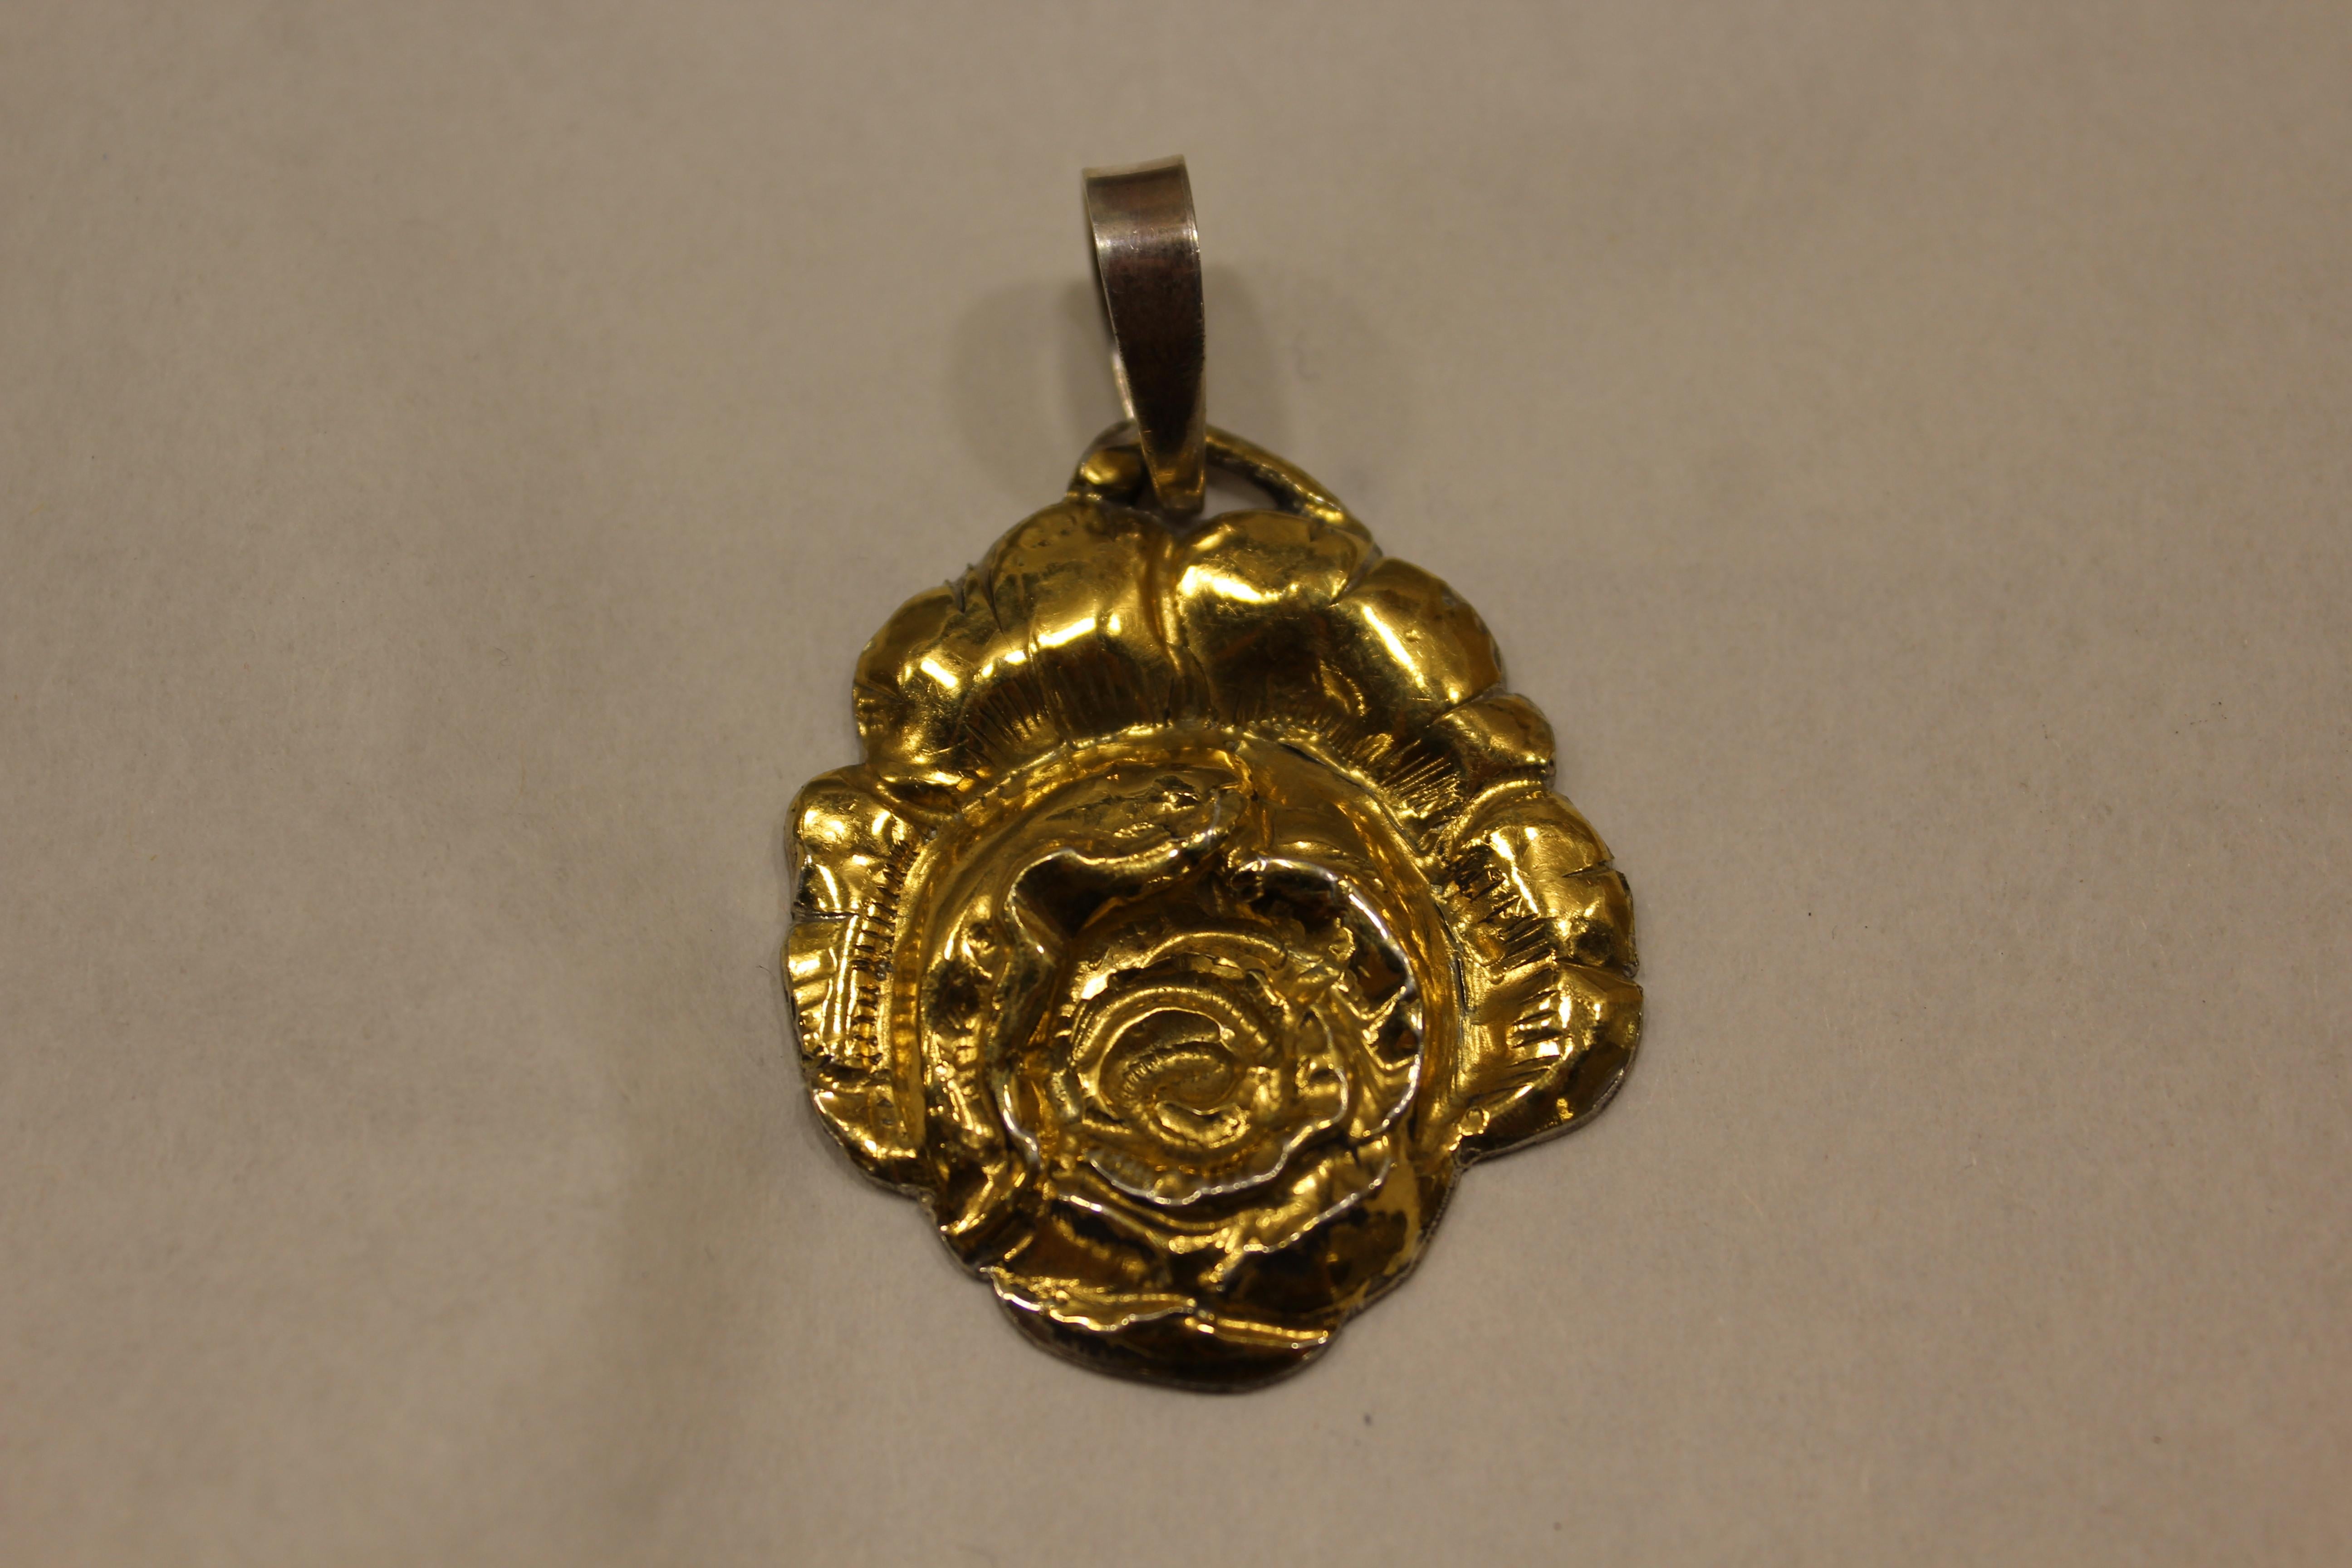 24 Karat Gold, Solid Silver, Pendant, Rose, Handcrafted, Italy In New Condition For Sale In Firenze, IT